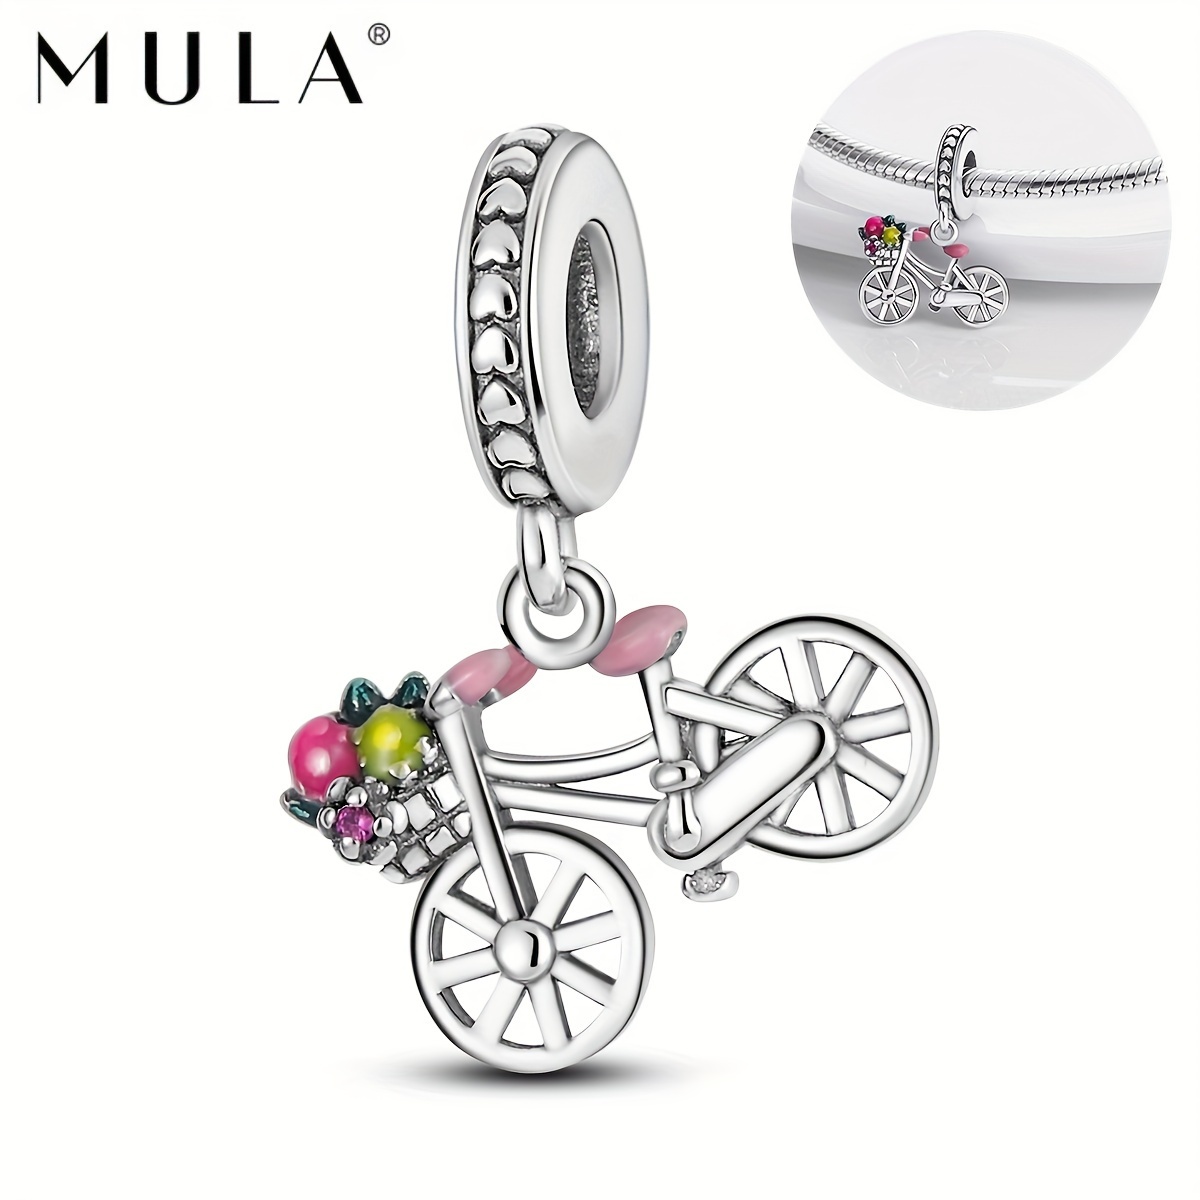 

Mula 925 Silvery-plated Romantic Love Heart & Cycle Charm - Pink Enamel Pendant Toward Diy Jewelry, Fits Snake Bracelets, Necklaces, Bangles - Perfect Gift Toward Her